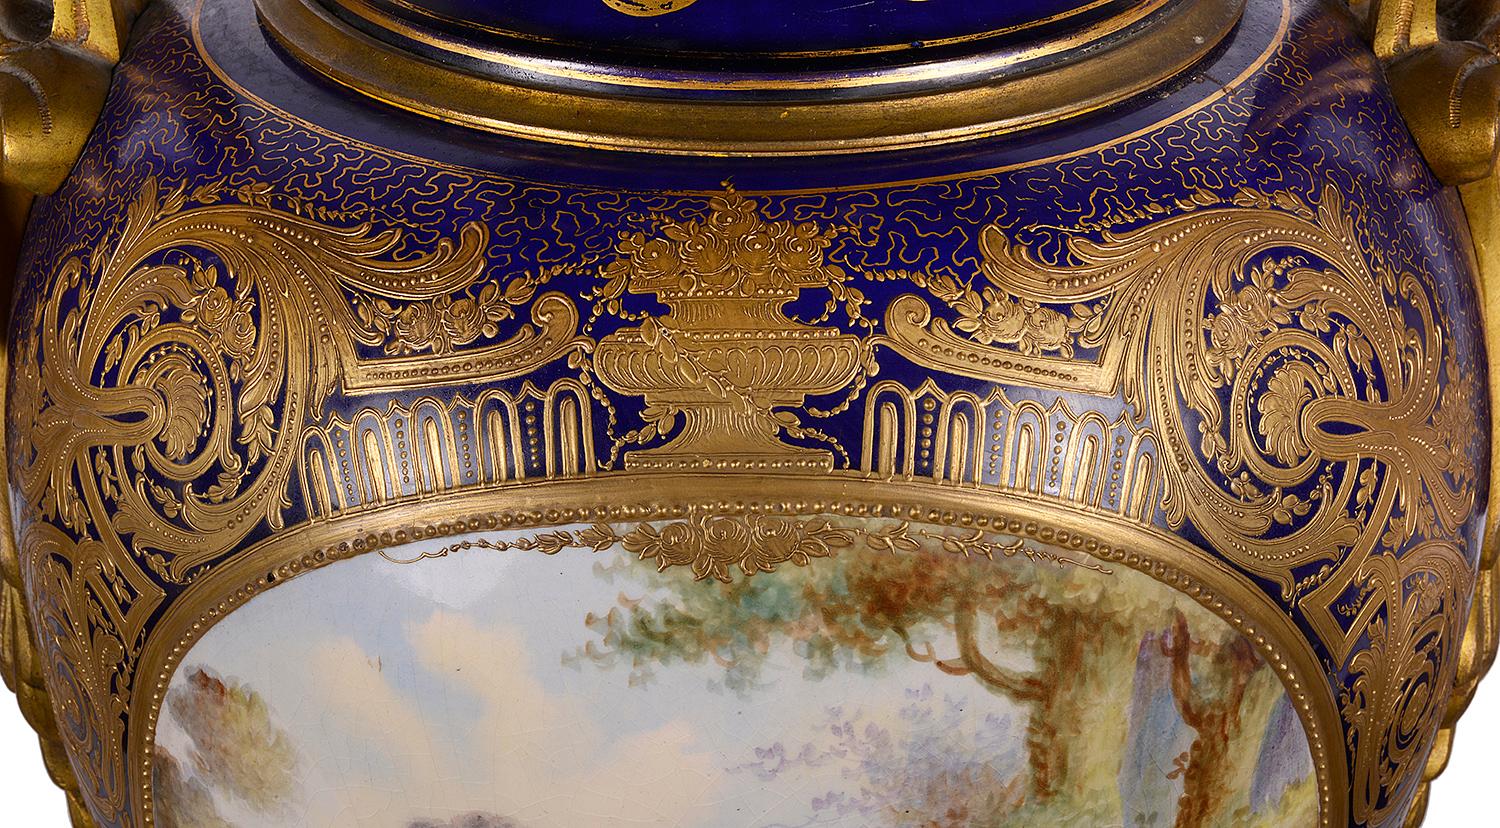 A large, good quality pair of late 19th century French 'Sevres' style porcelain vases, each with wonderful gilded ormolu swag and foliate handles on either side, Cobalt blue ground, with classical gilded decoration. Inset hand painted panels